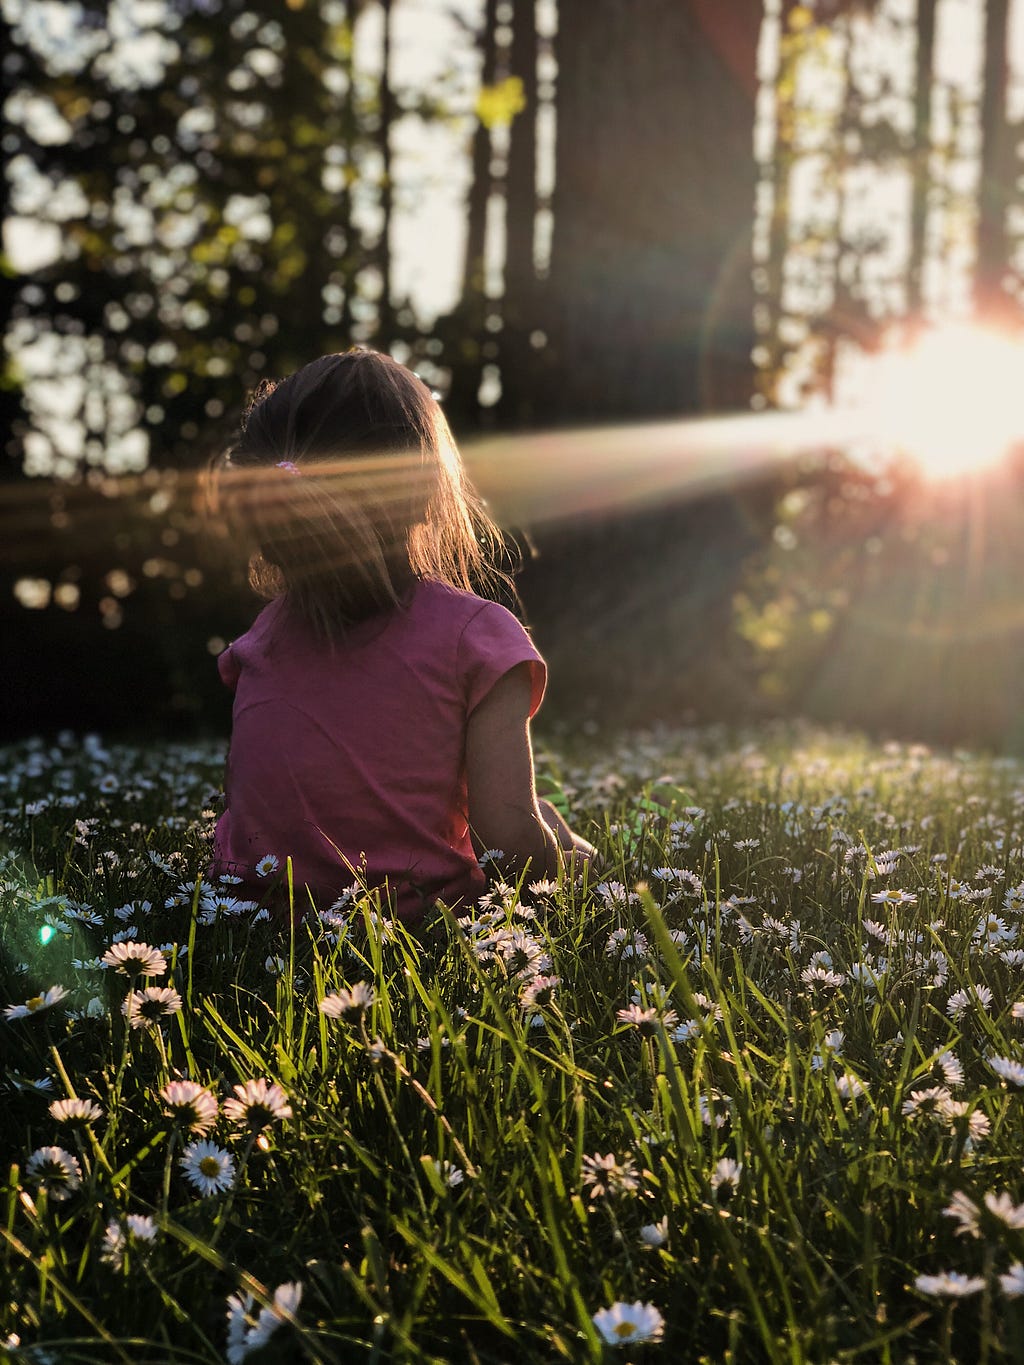 A girl in a field of flowers, gazing at the sunlight beaming through the canopes.